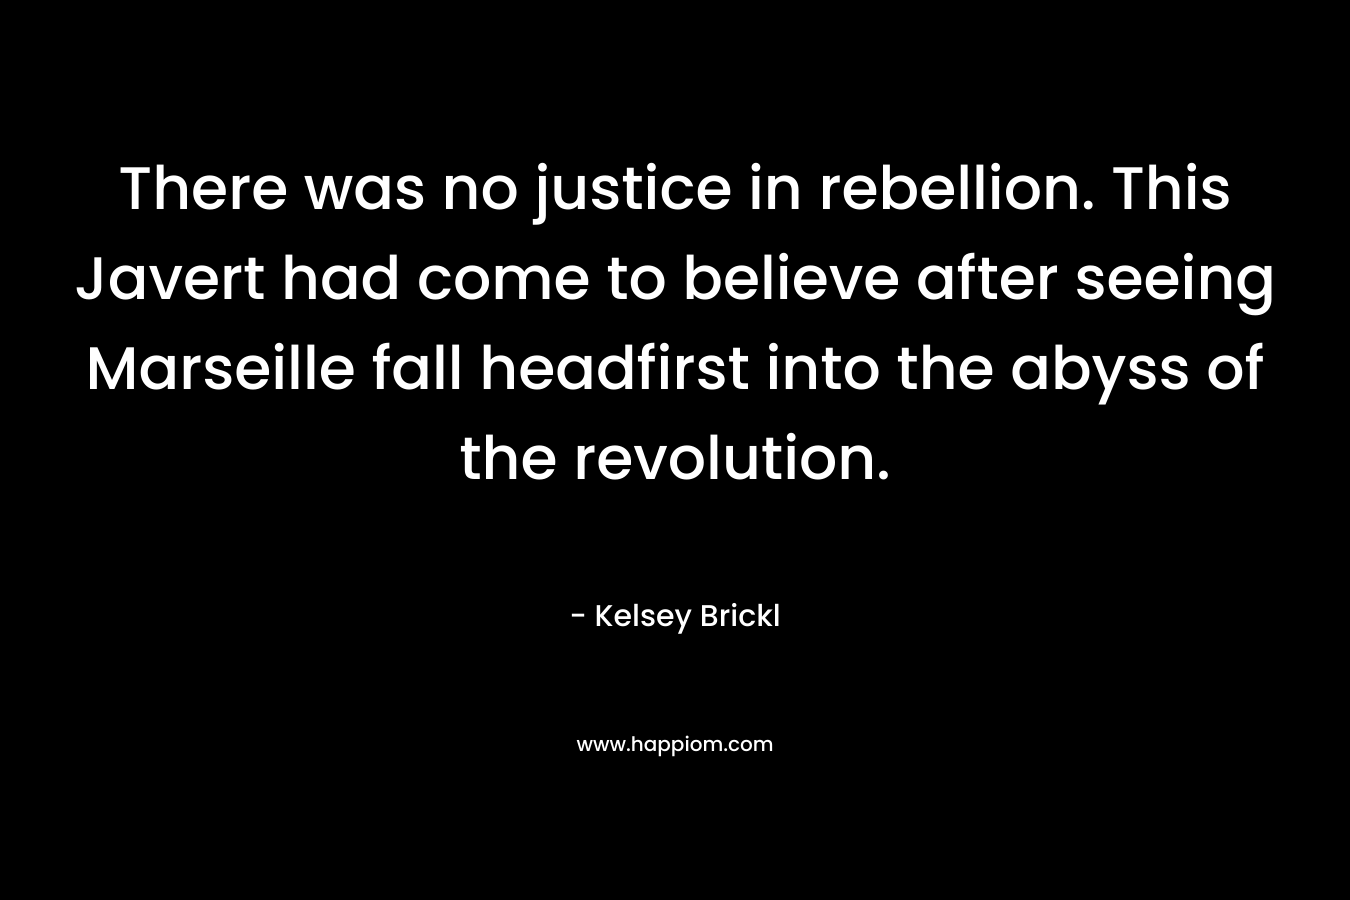 There was no justice in rebellion. This Javert had come to believe after seeing Marseille fall headfirst into the abyss of the revolution.